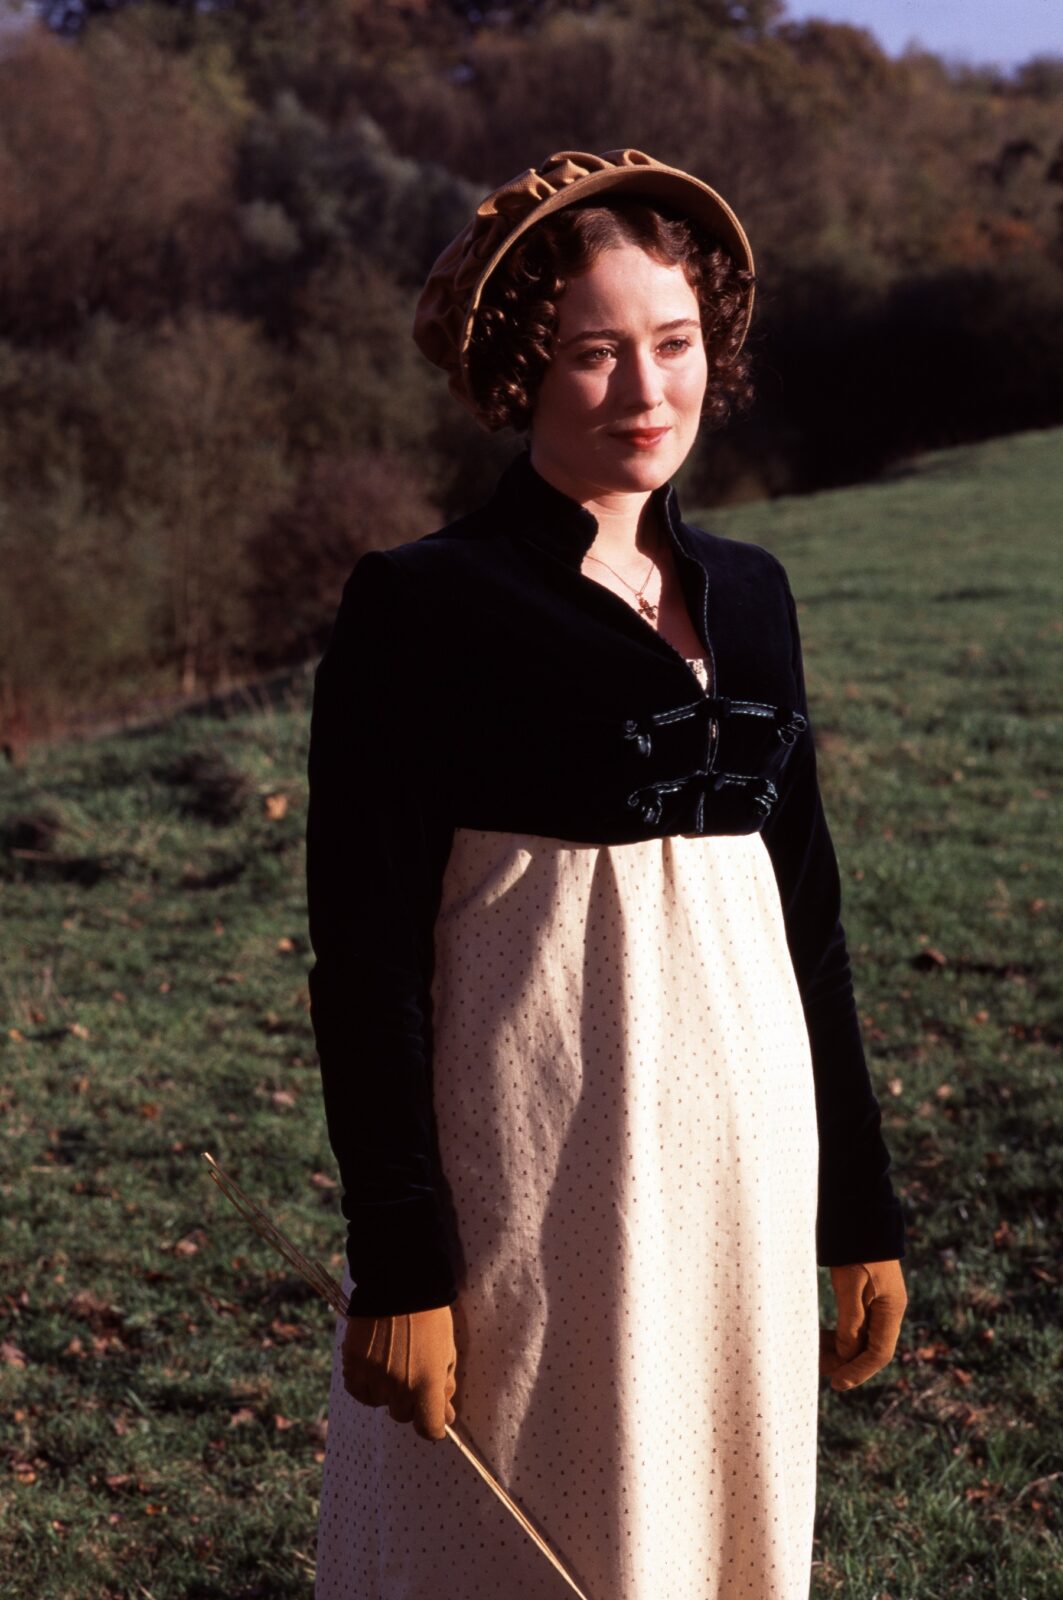 Lizzy Bennet (played by Jennifer Ehle) crosses the muddy fields to Netherfield. Image ©BBC